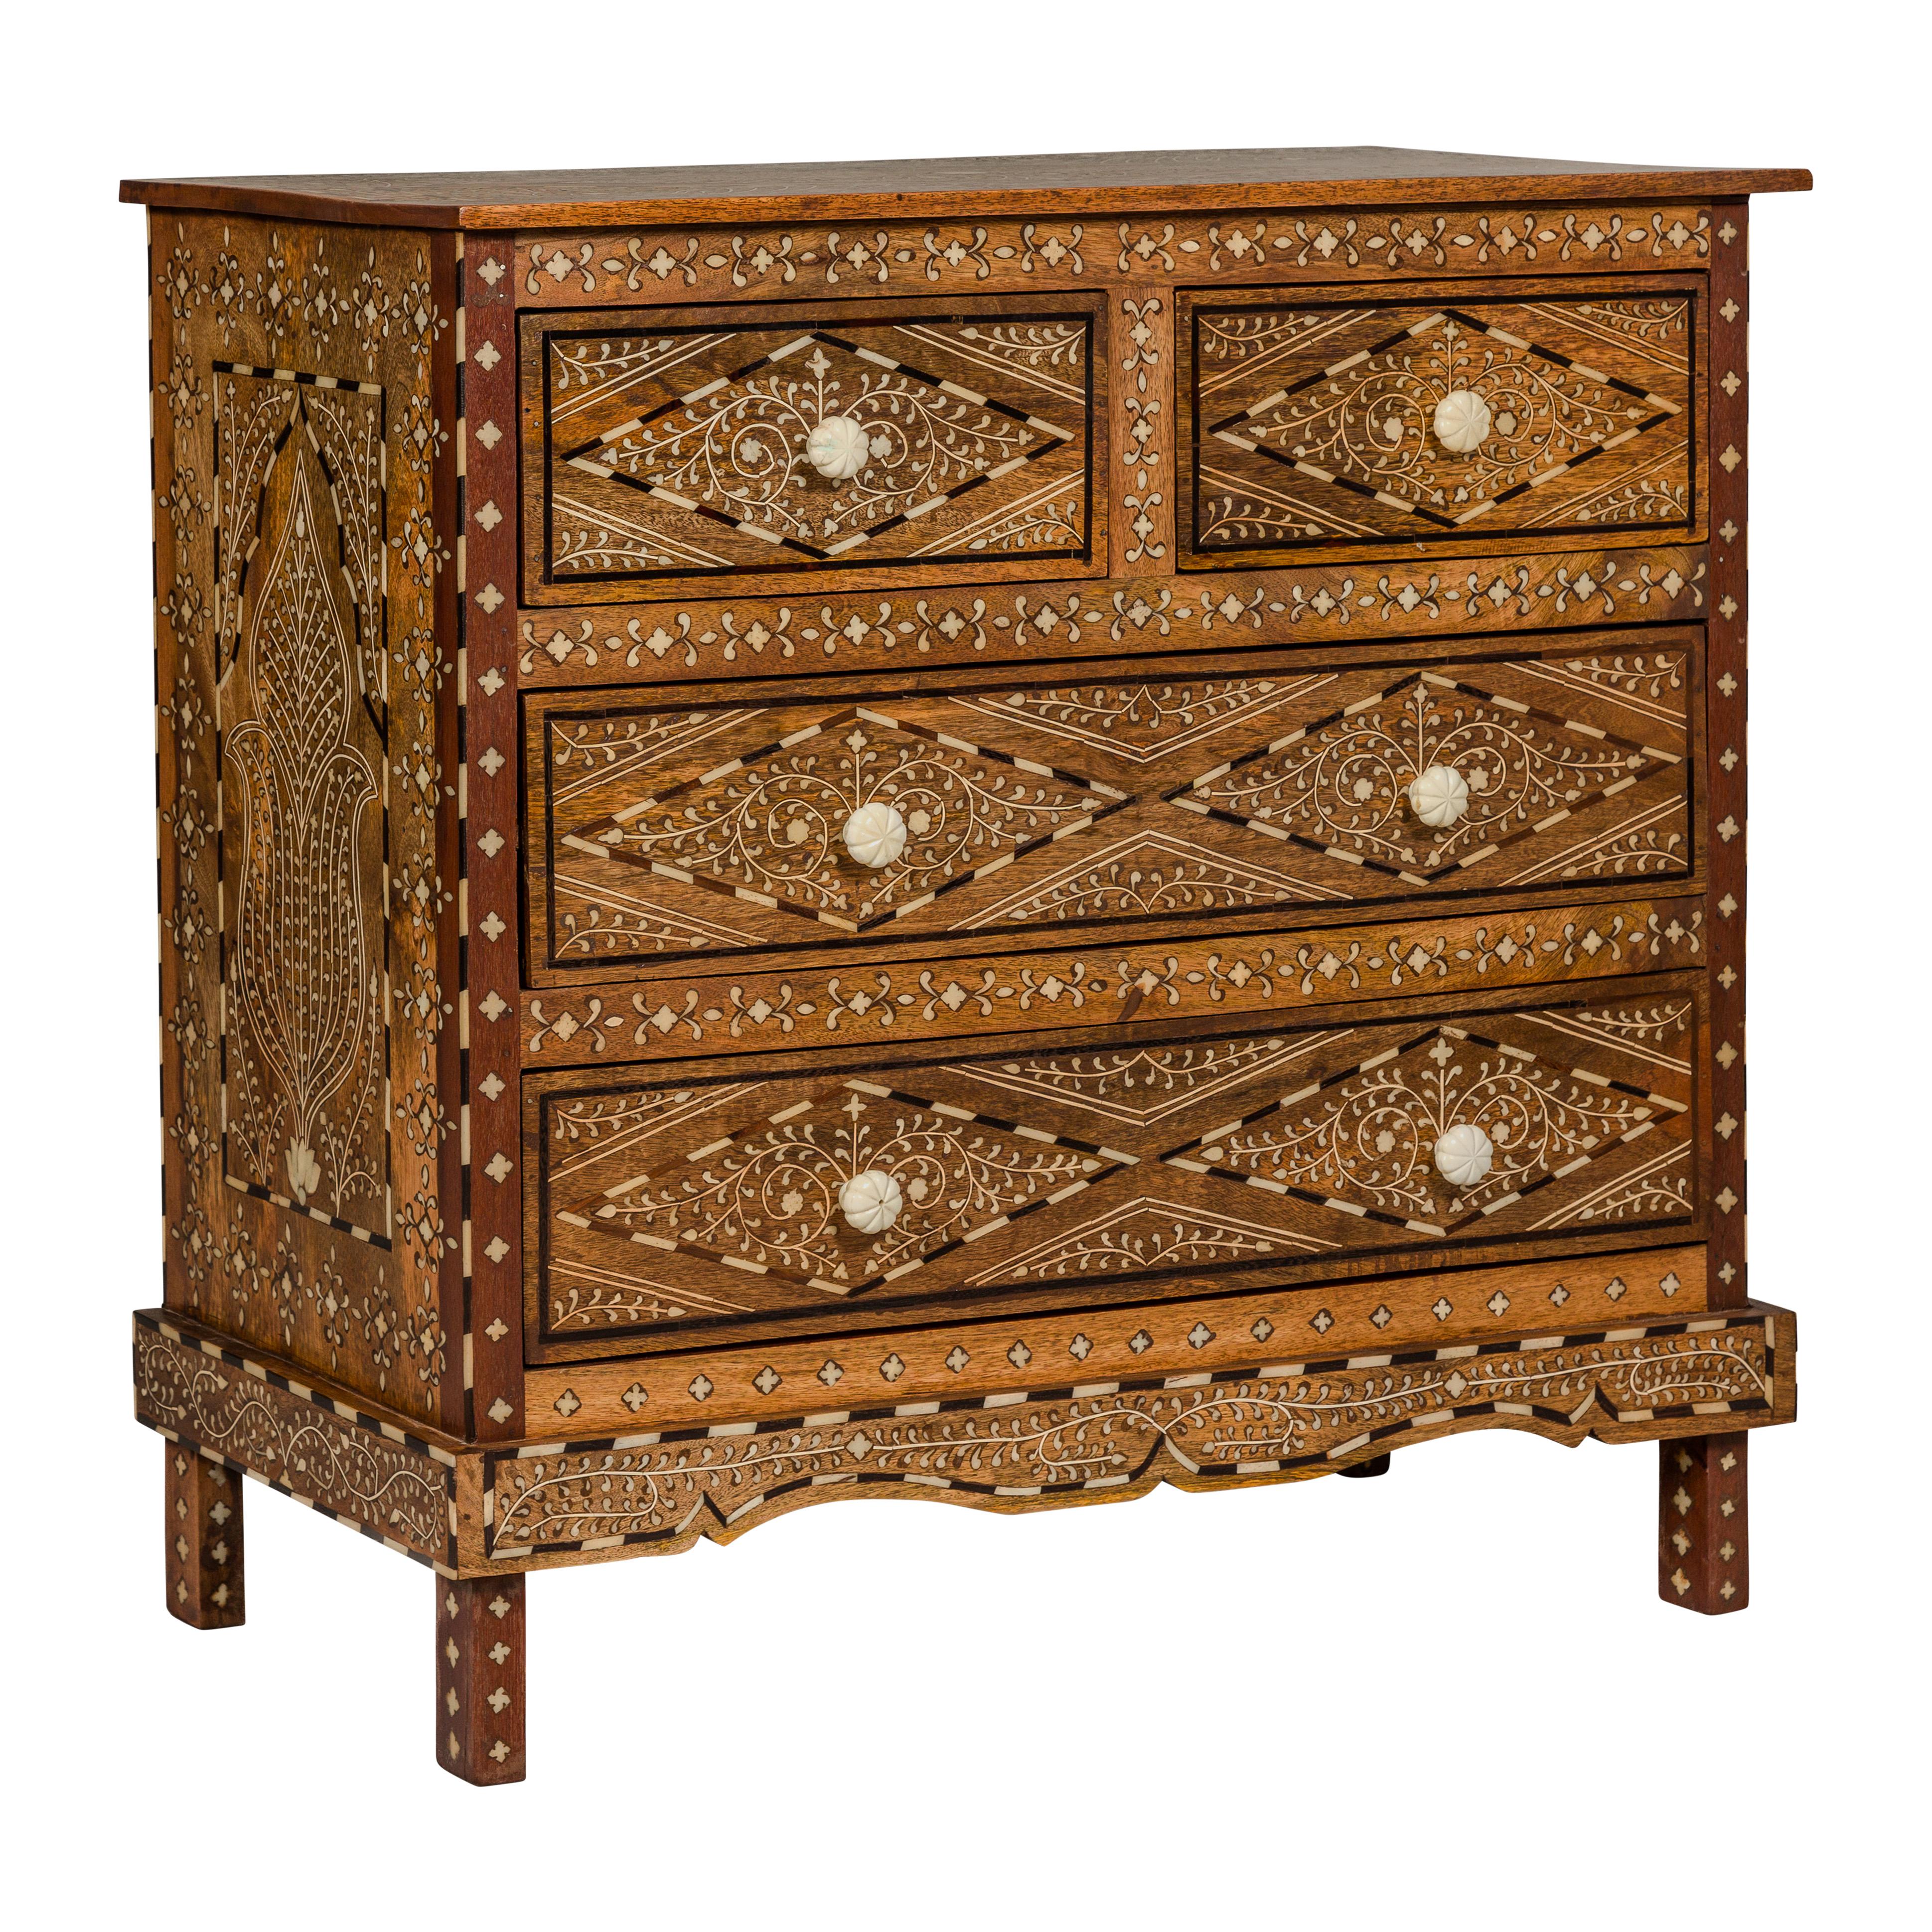 Anglo-Indian Style Mango Wood Four-Drawer Chest with Foliage Bone Inlay For Sale 14